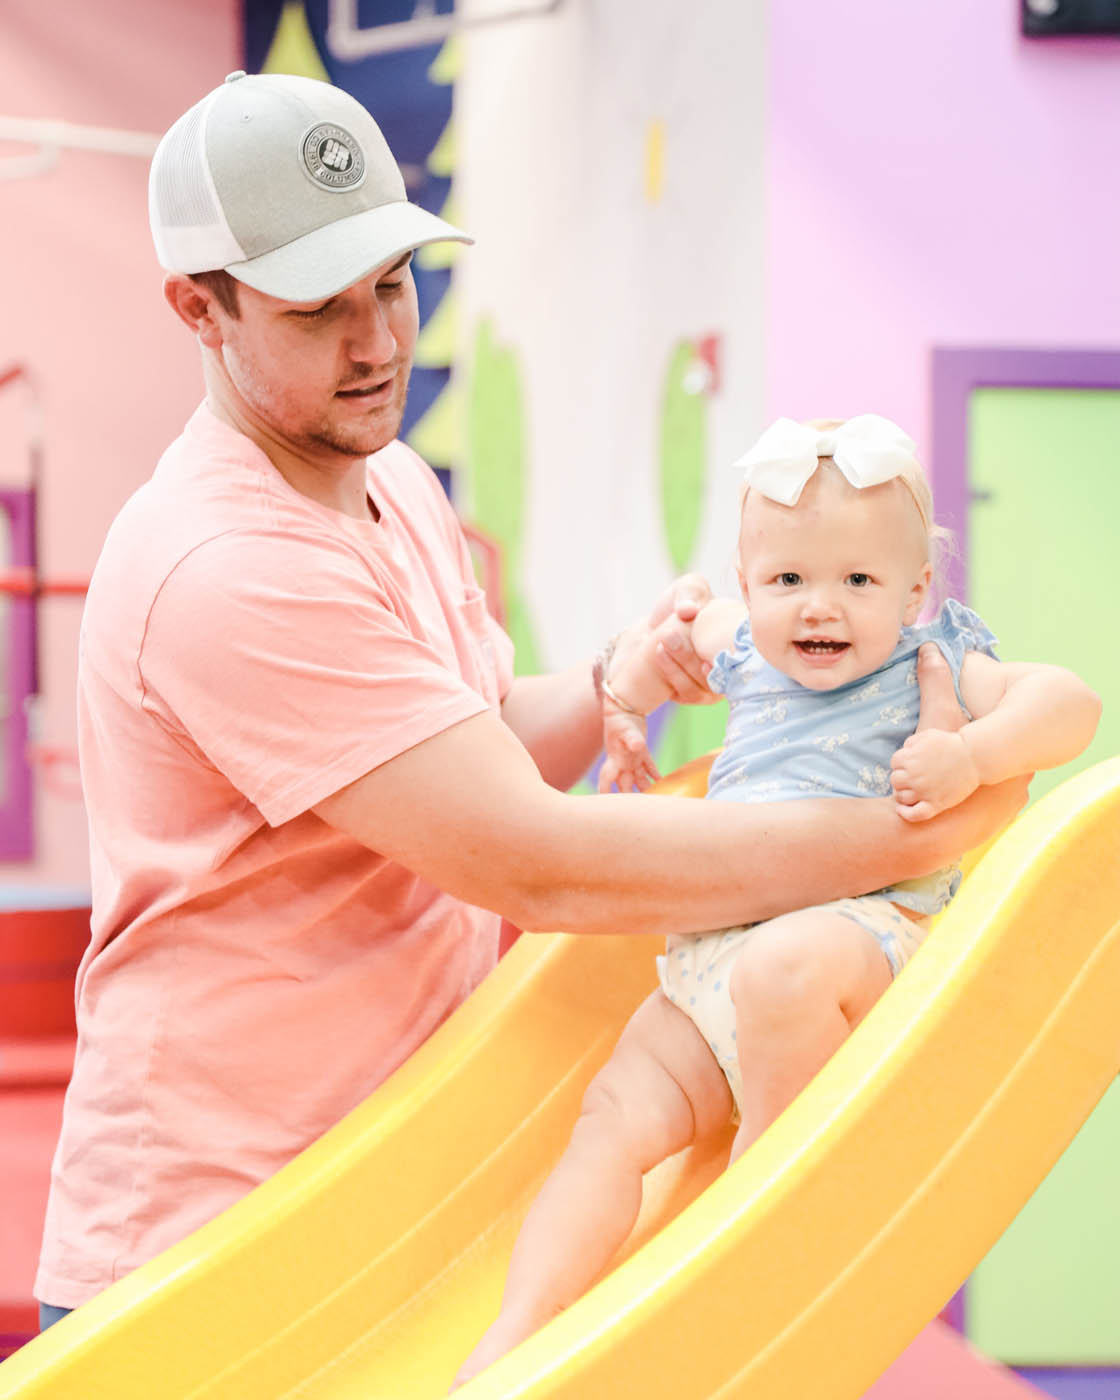 A dad and child playing at Romp n' Roll Wethersfield's family fun place.